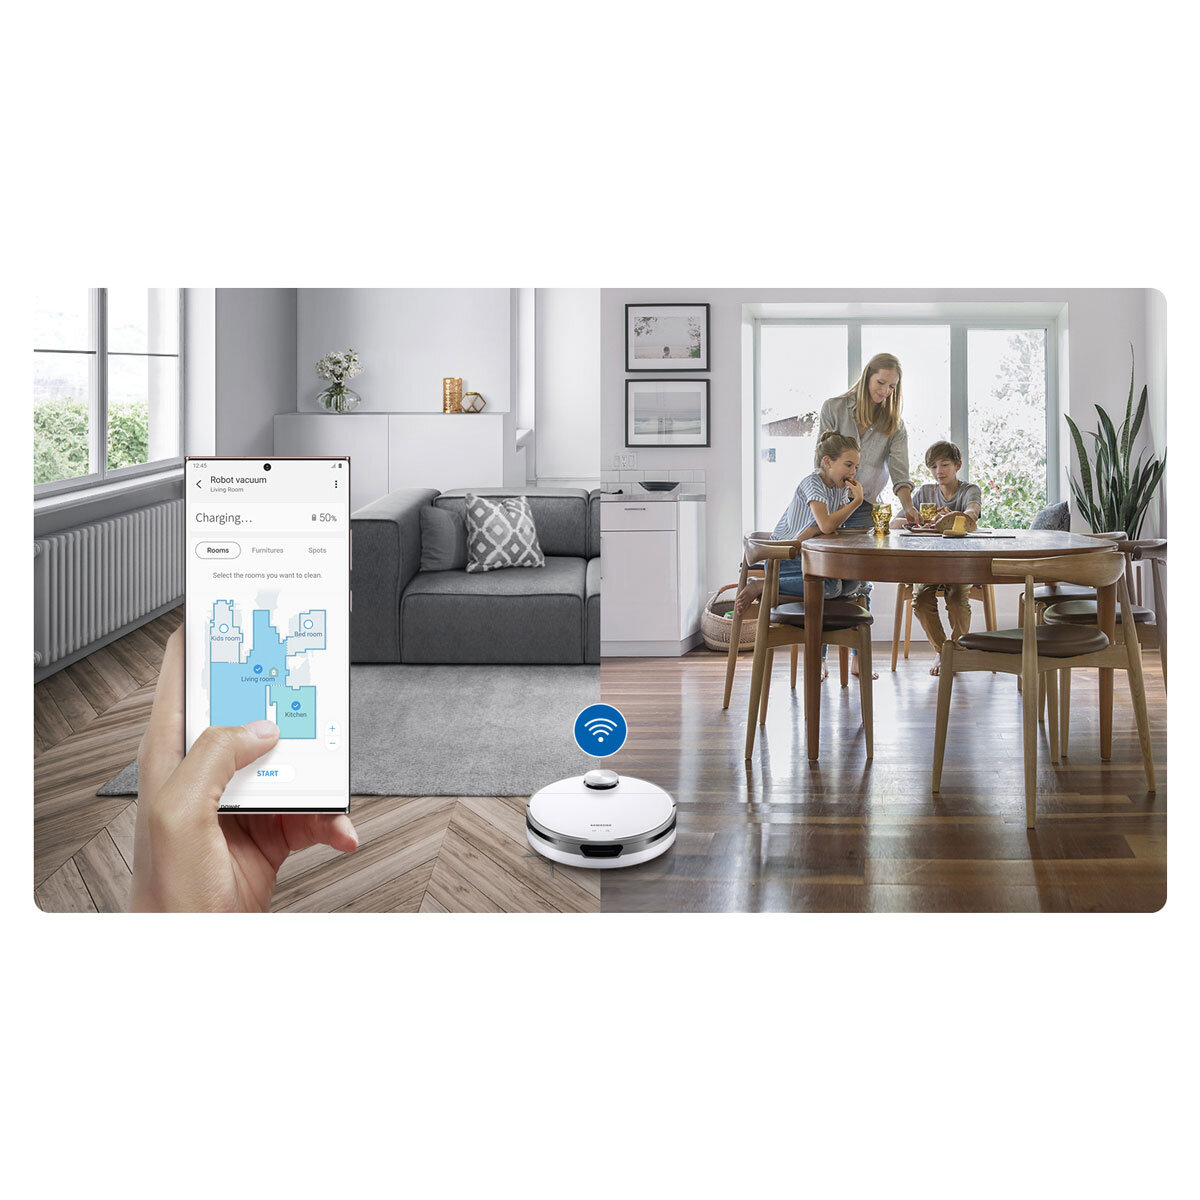 Lifestyle image of Samsung Robotic Vac showing phone connectivity